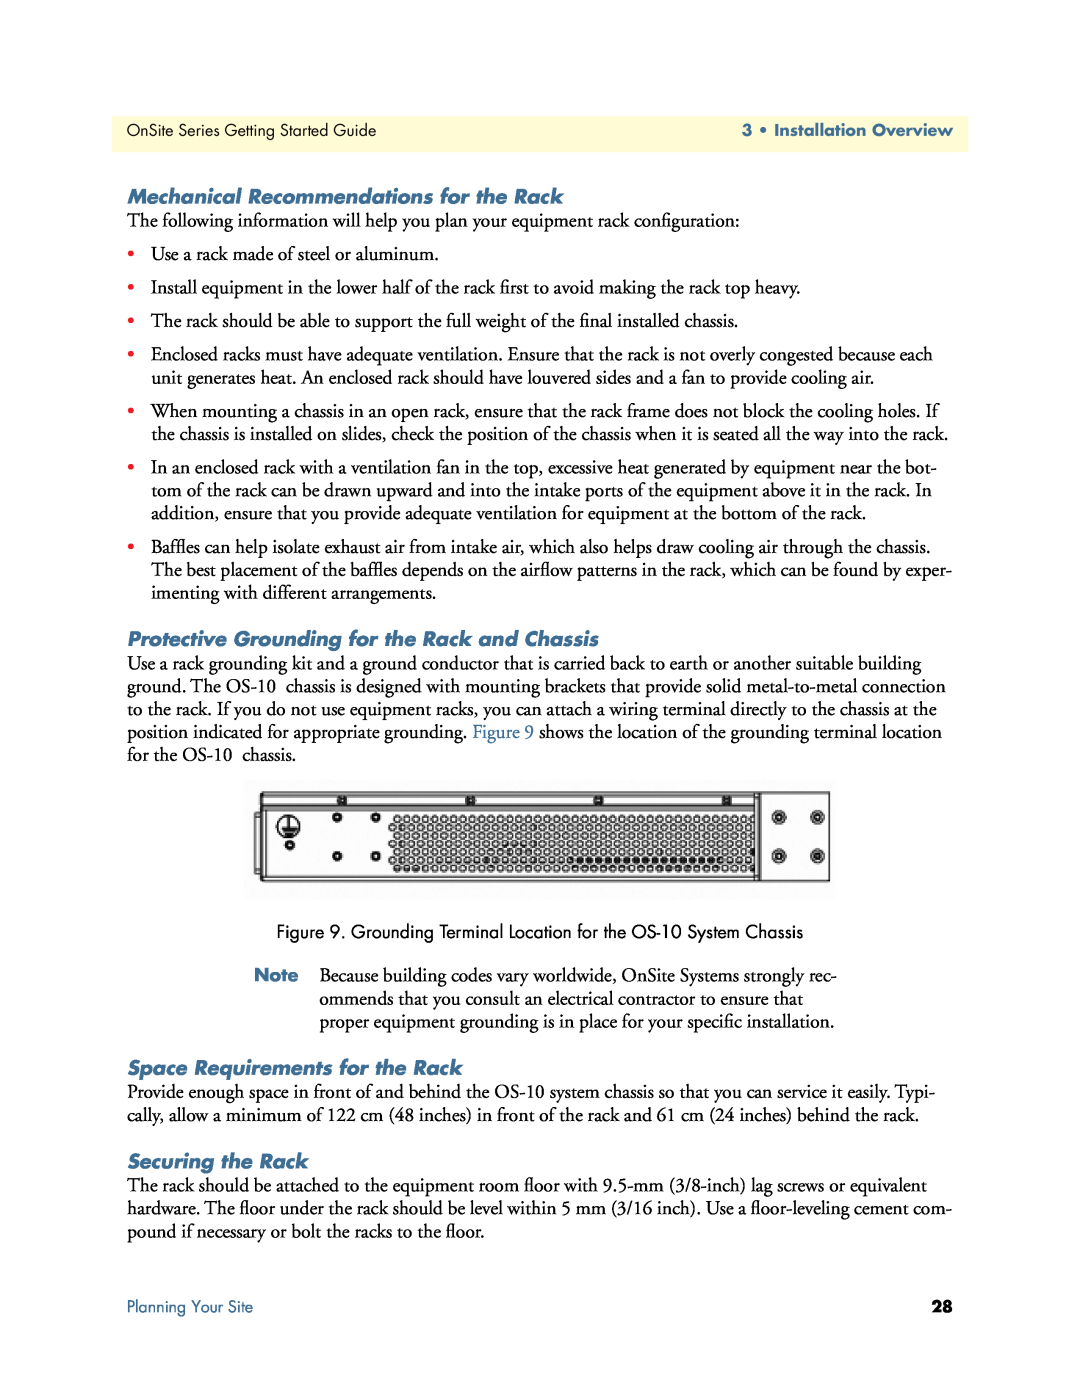 Patton electronic 07MOS10xx-GS Mechanical Recommendations for the Rack, Protective Grounding for the Rack and Chassis 